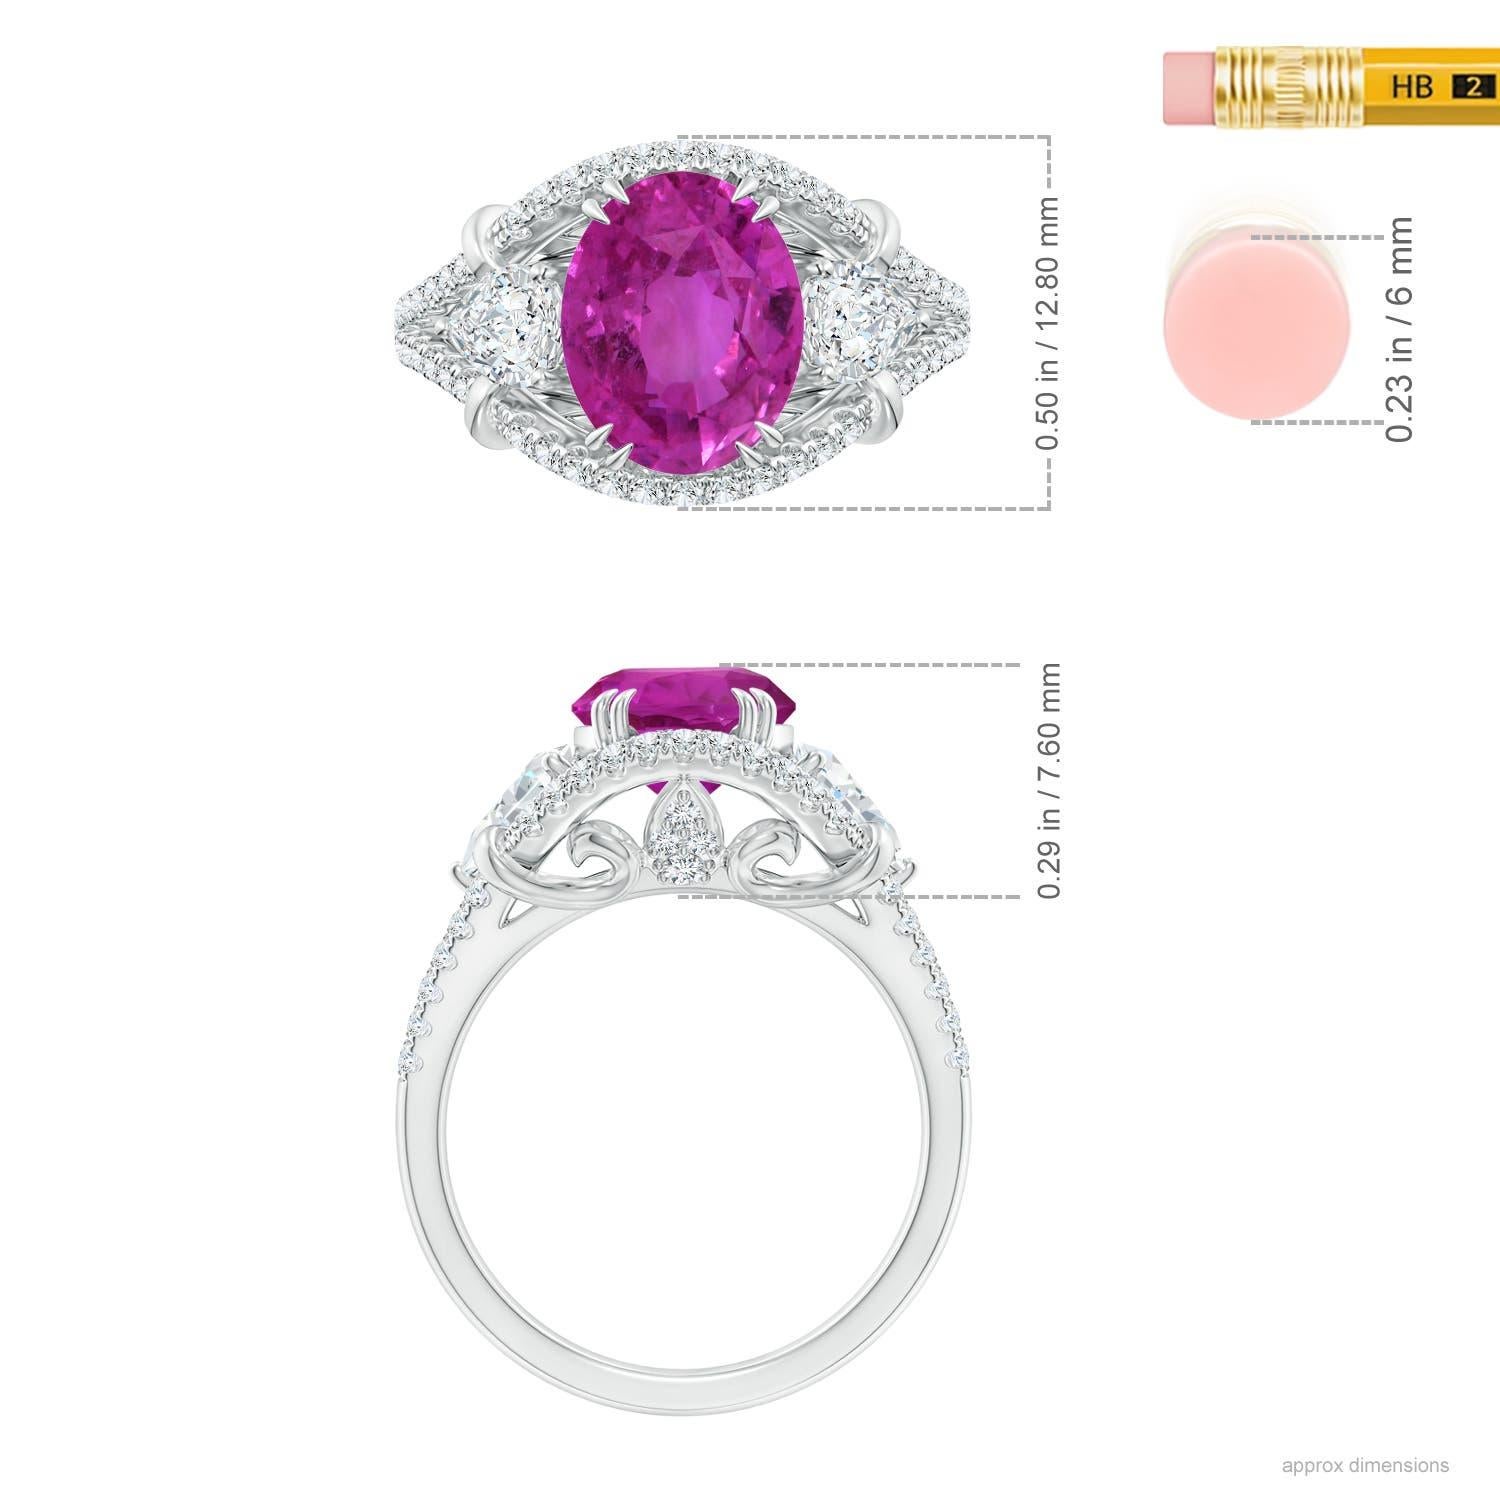 For Sale:  Angara GIA Certified Natural Pink Sapphire Ring in White Gold with Diamonds 6